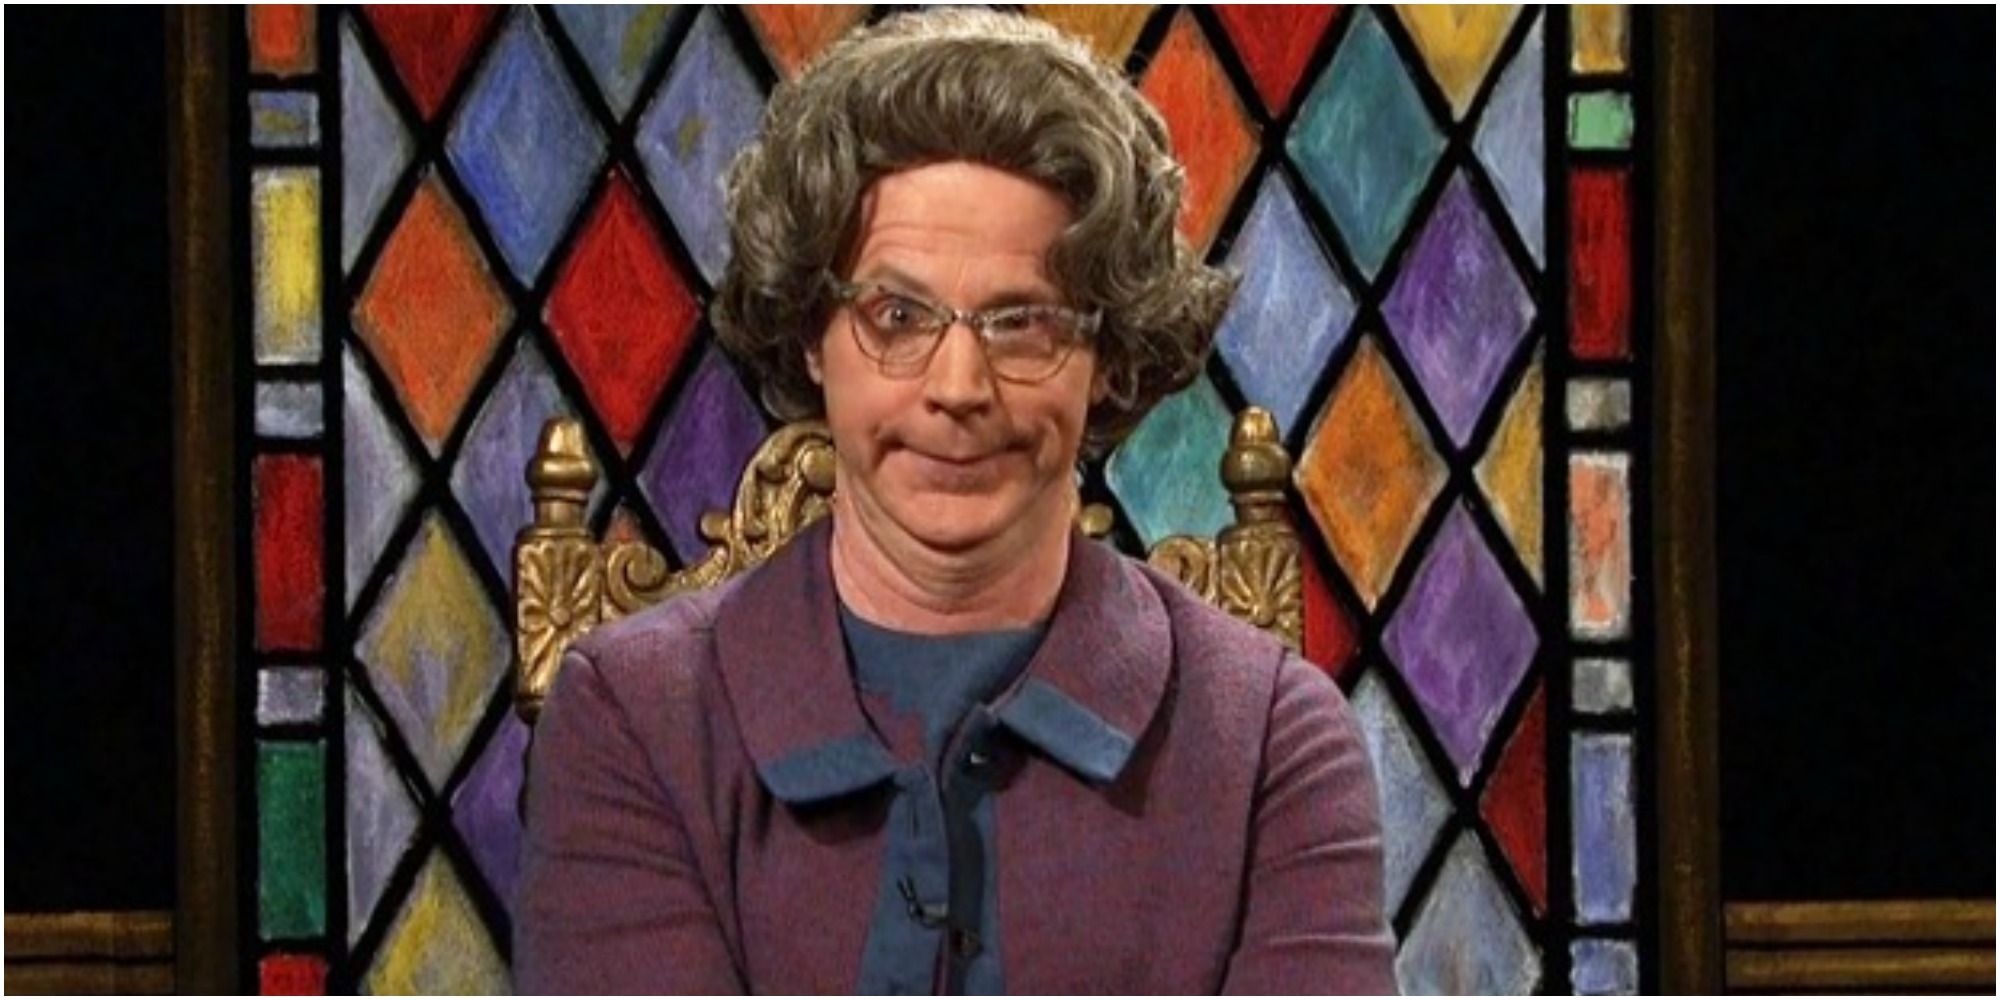 A screenshot of The Church Lady from Saturday Night Live